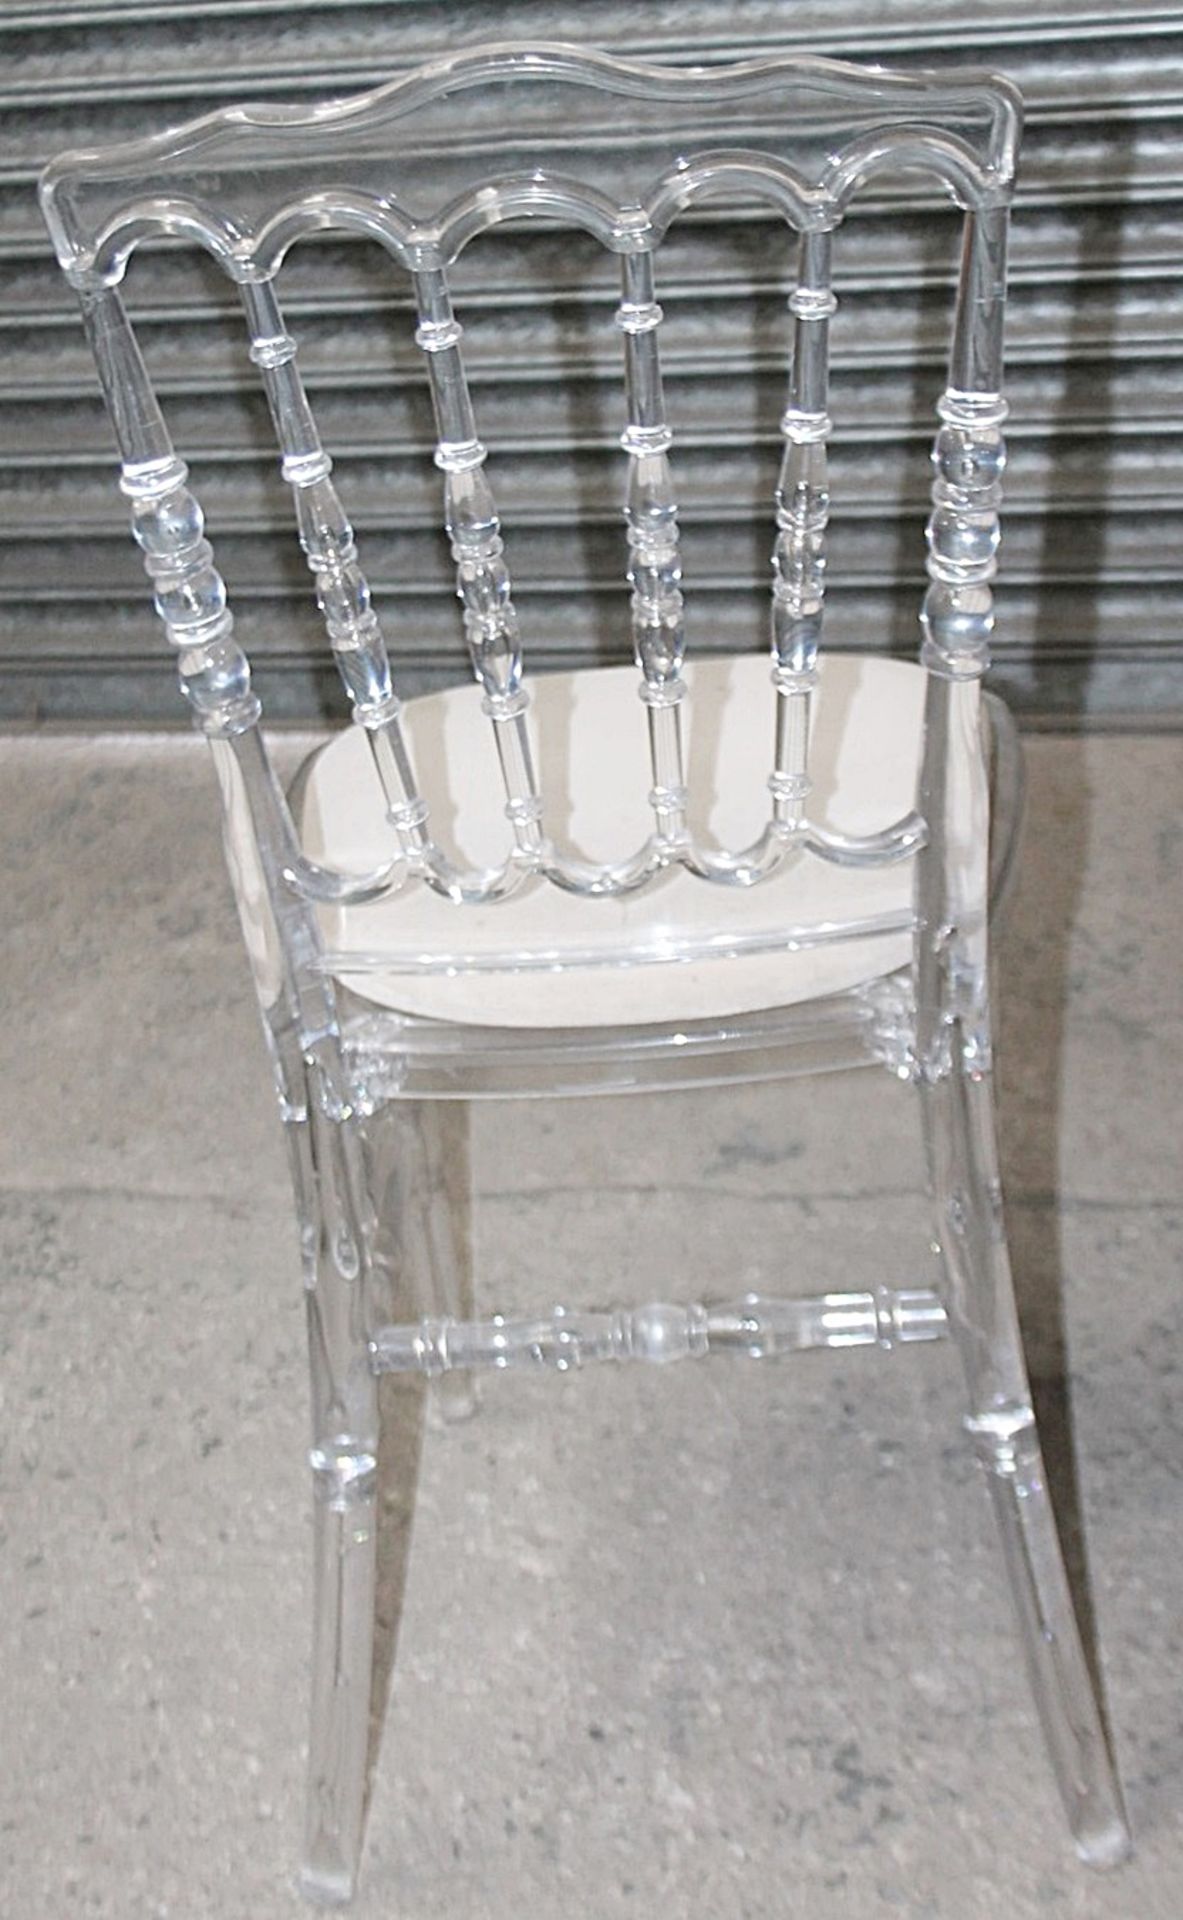 10 x High Quality Clear Acrylic Spindle Back Commercial Dining Chairs With Removable Seat Pads - Image 6 of 10